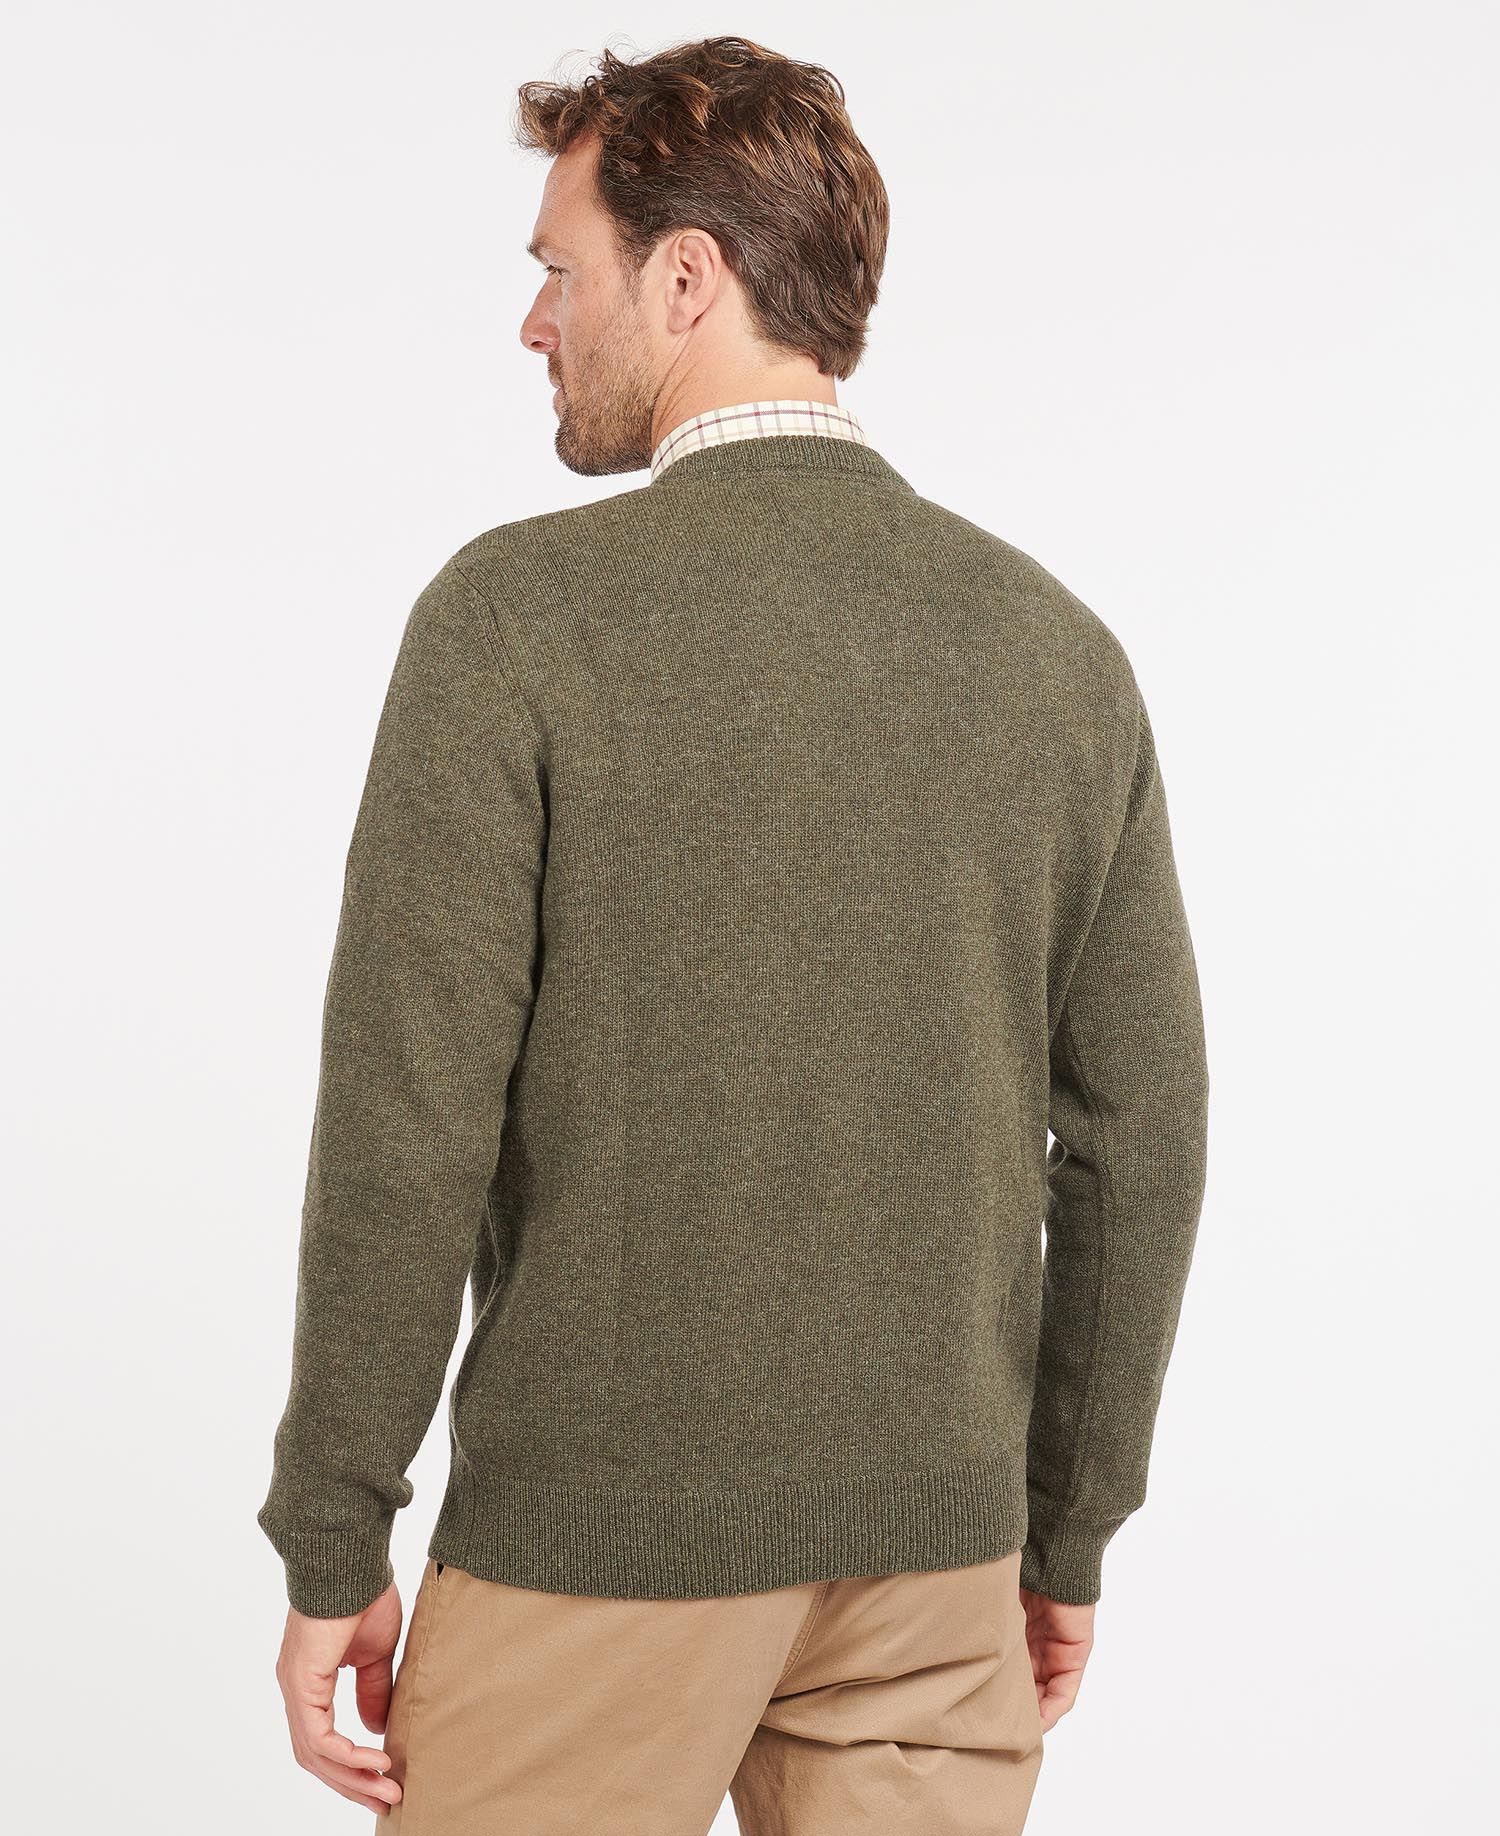 Nelson Essential V Neck Jumper - Seaweed - Ruffords Country Store